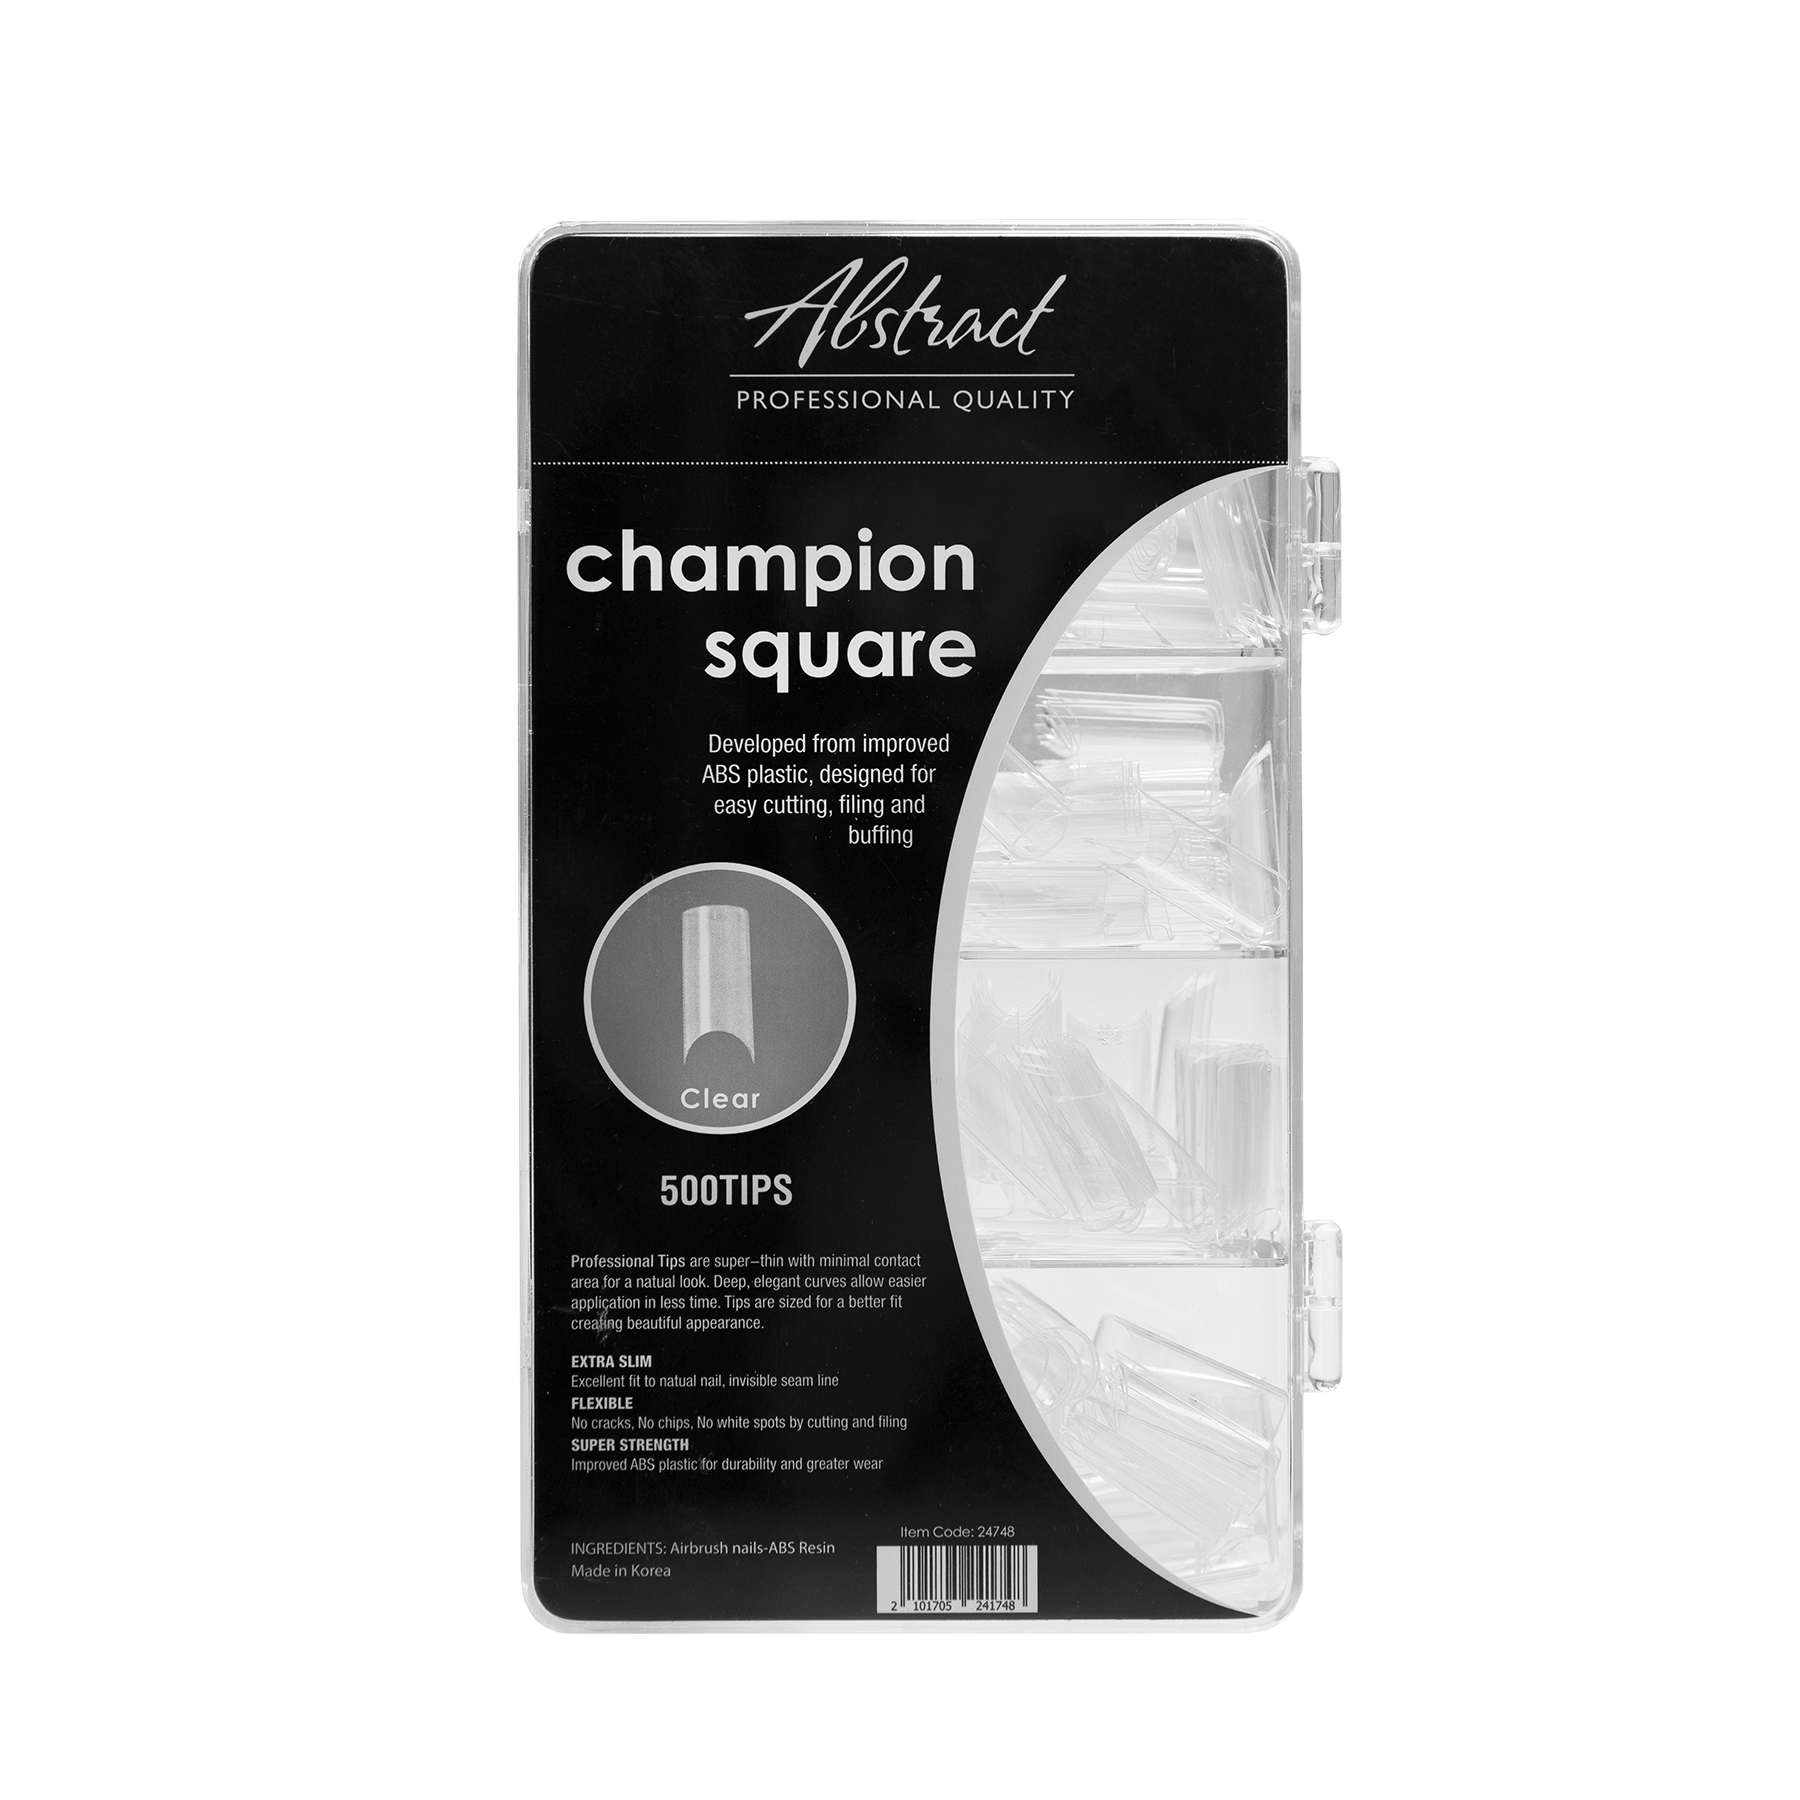 Champion Square Clear Tips (500pcs/box) | Abstract 241748